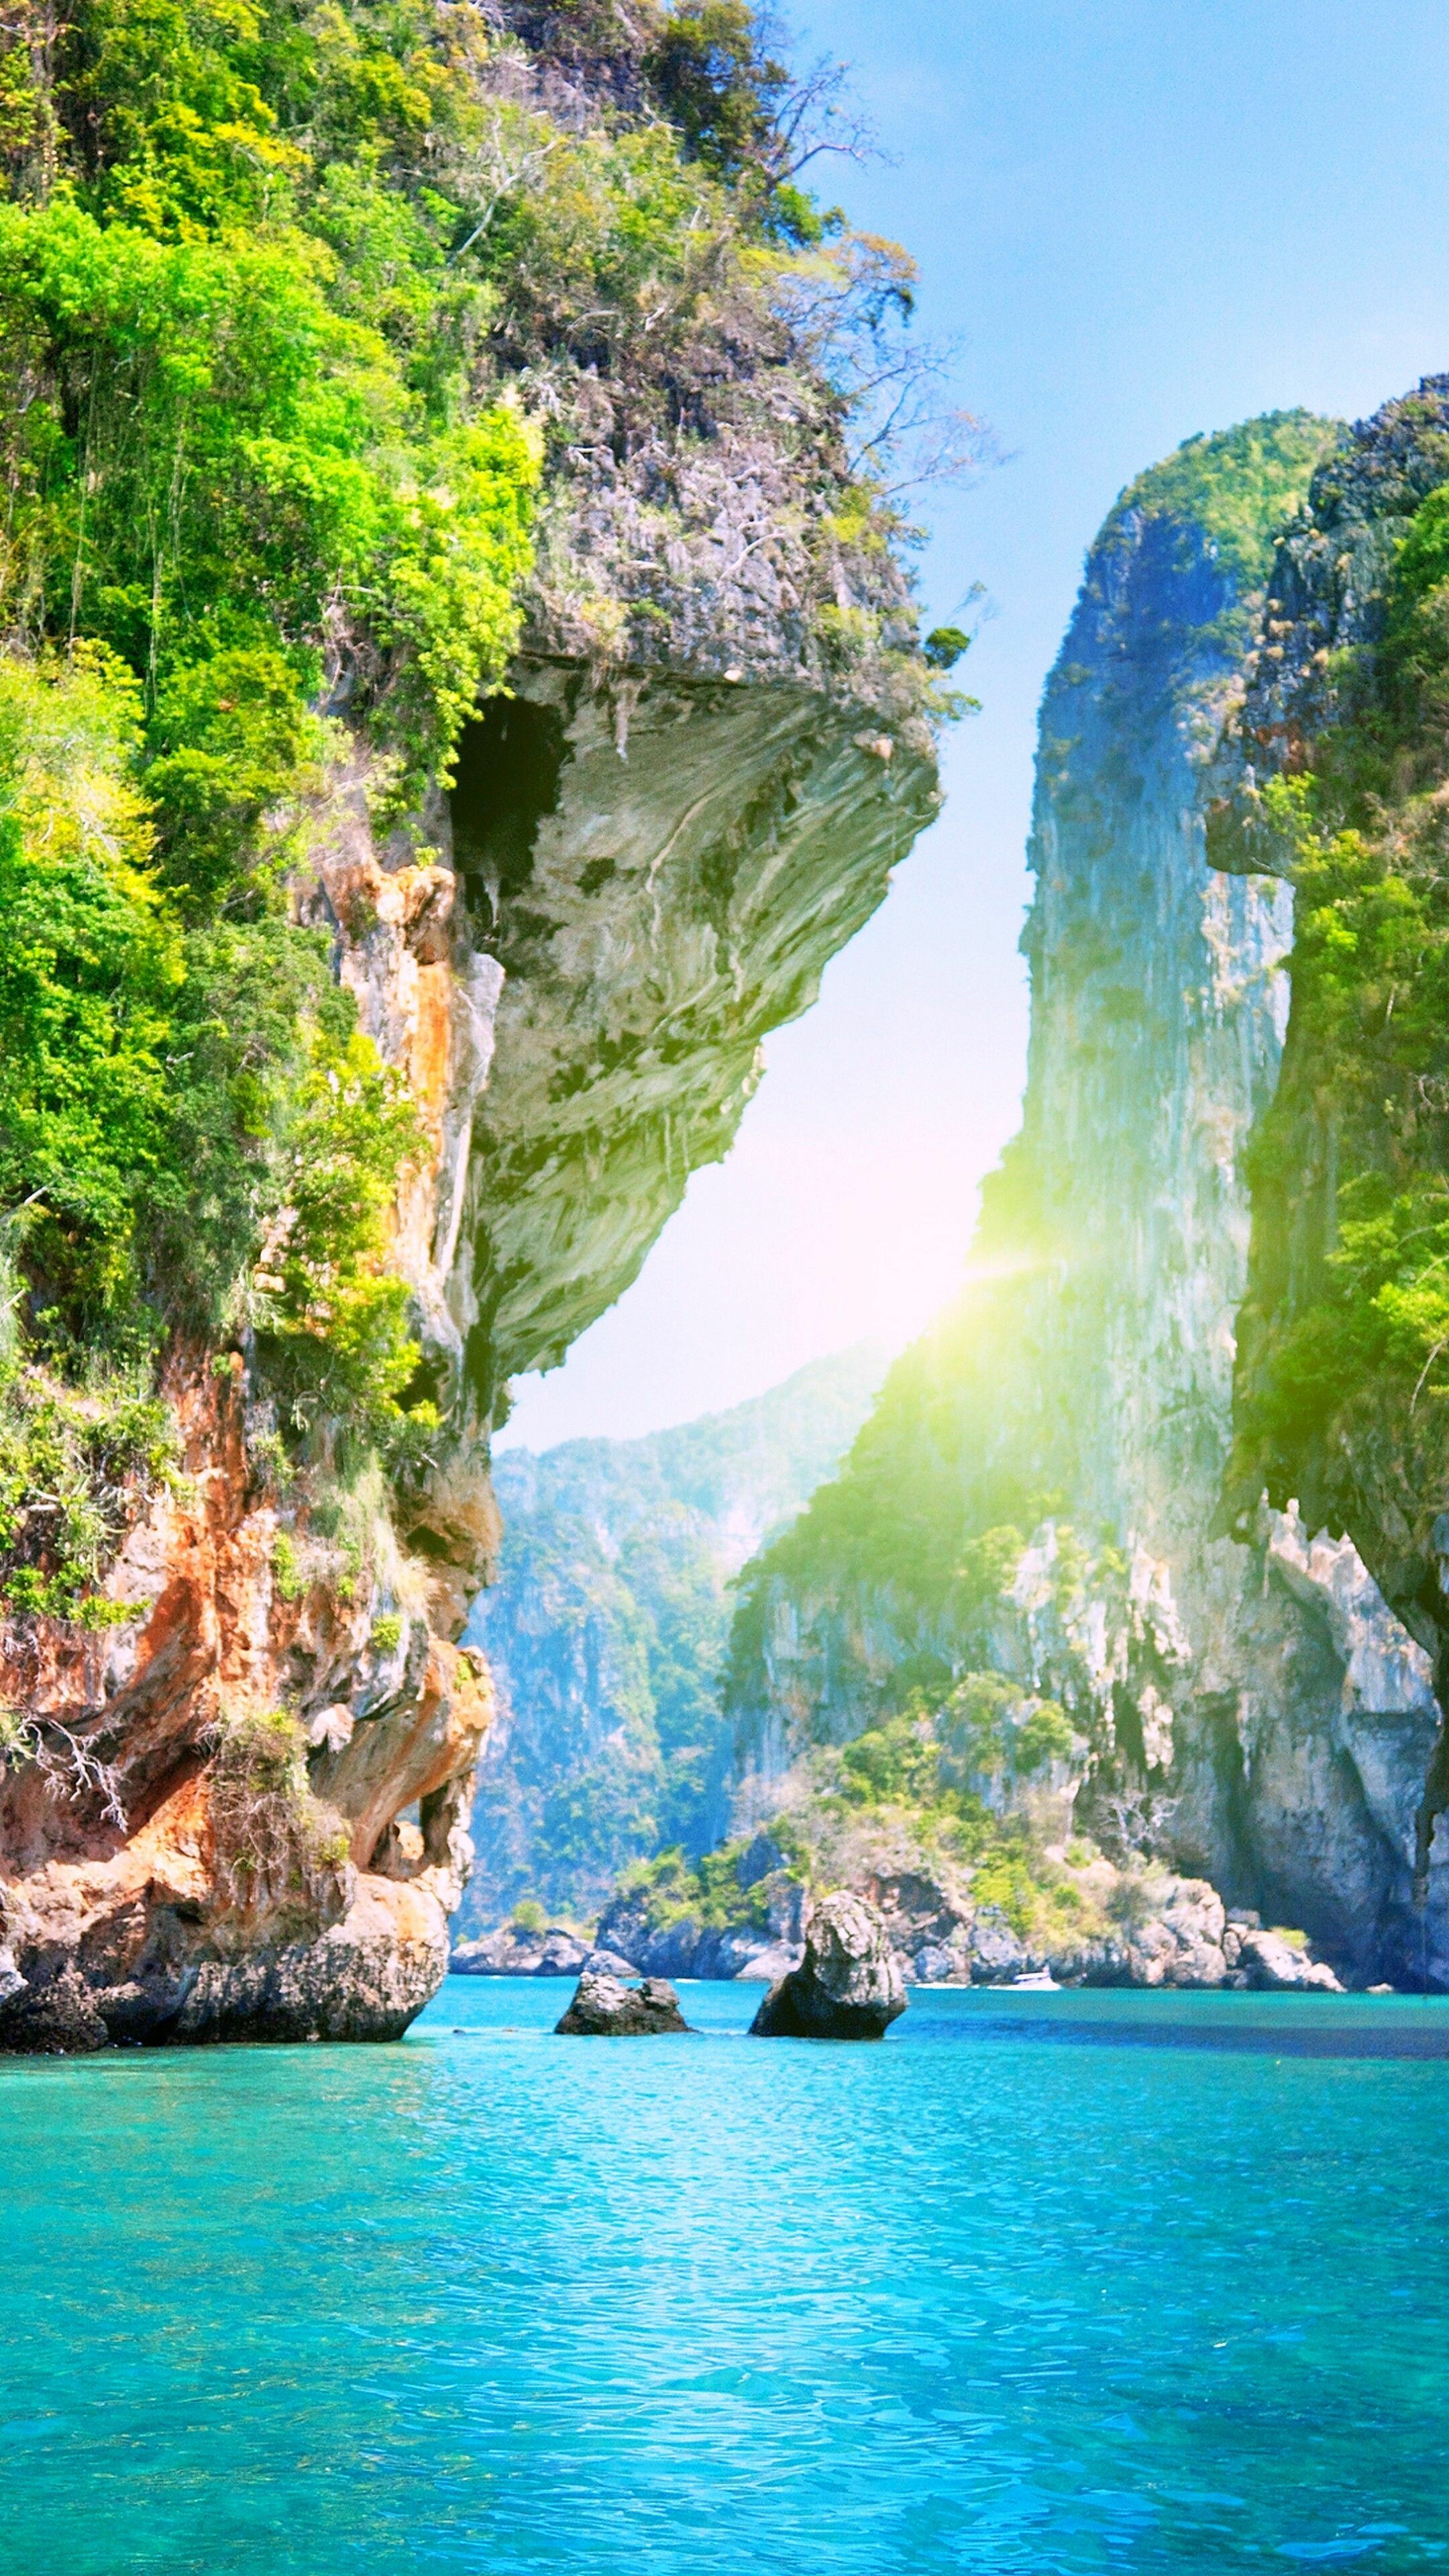 Island: Thailand, The land, formed by tectonic forces or volcanic eruptions. 2160x3840 4K Wallpaper.